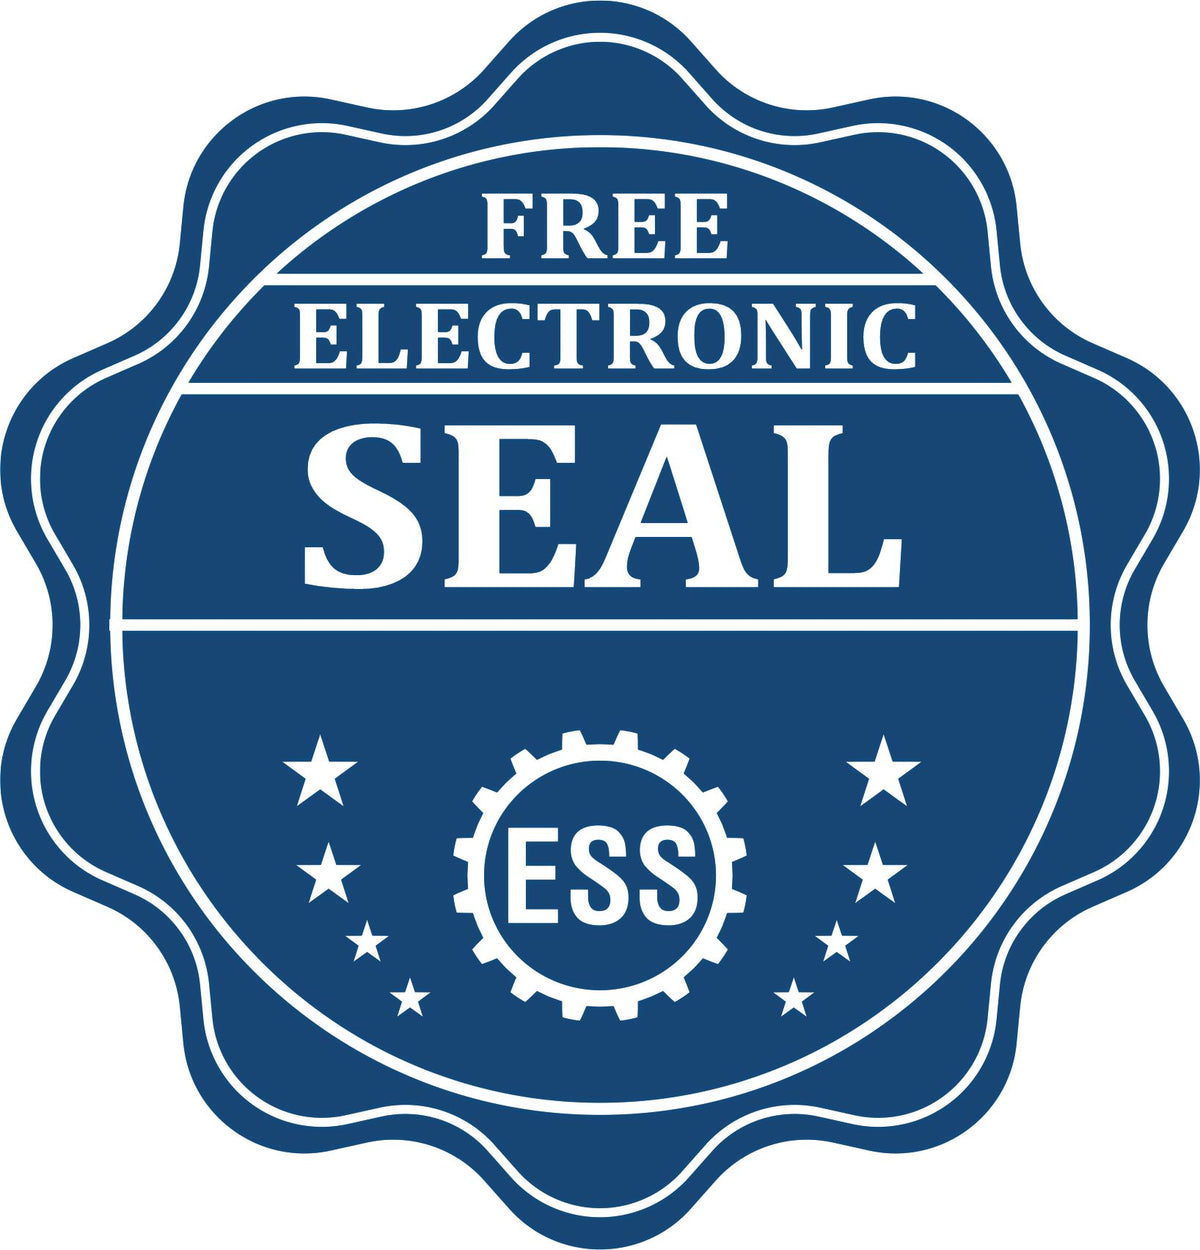 A badge showing a free electronic seal for the Heavy Duty Cast Iron Guam Geologist Seal Embosser with stars and the ESS gear on the emblem.